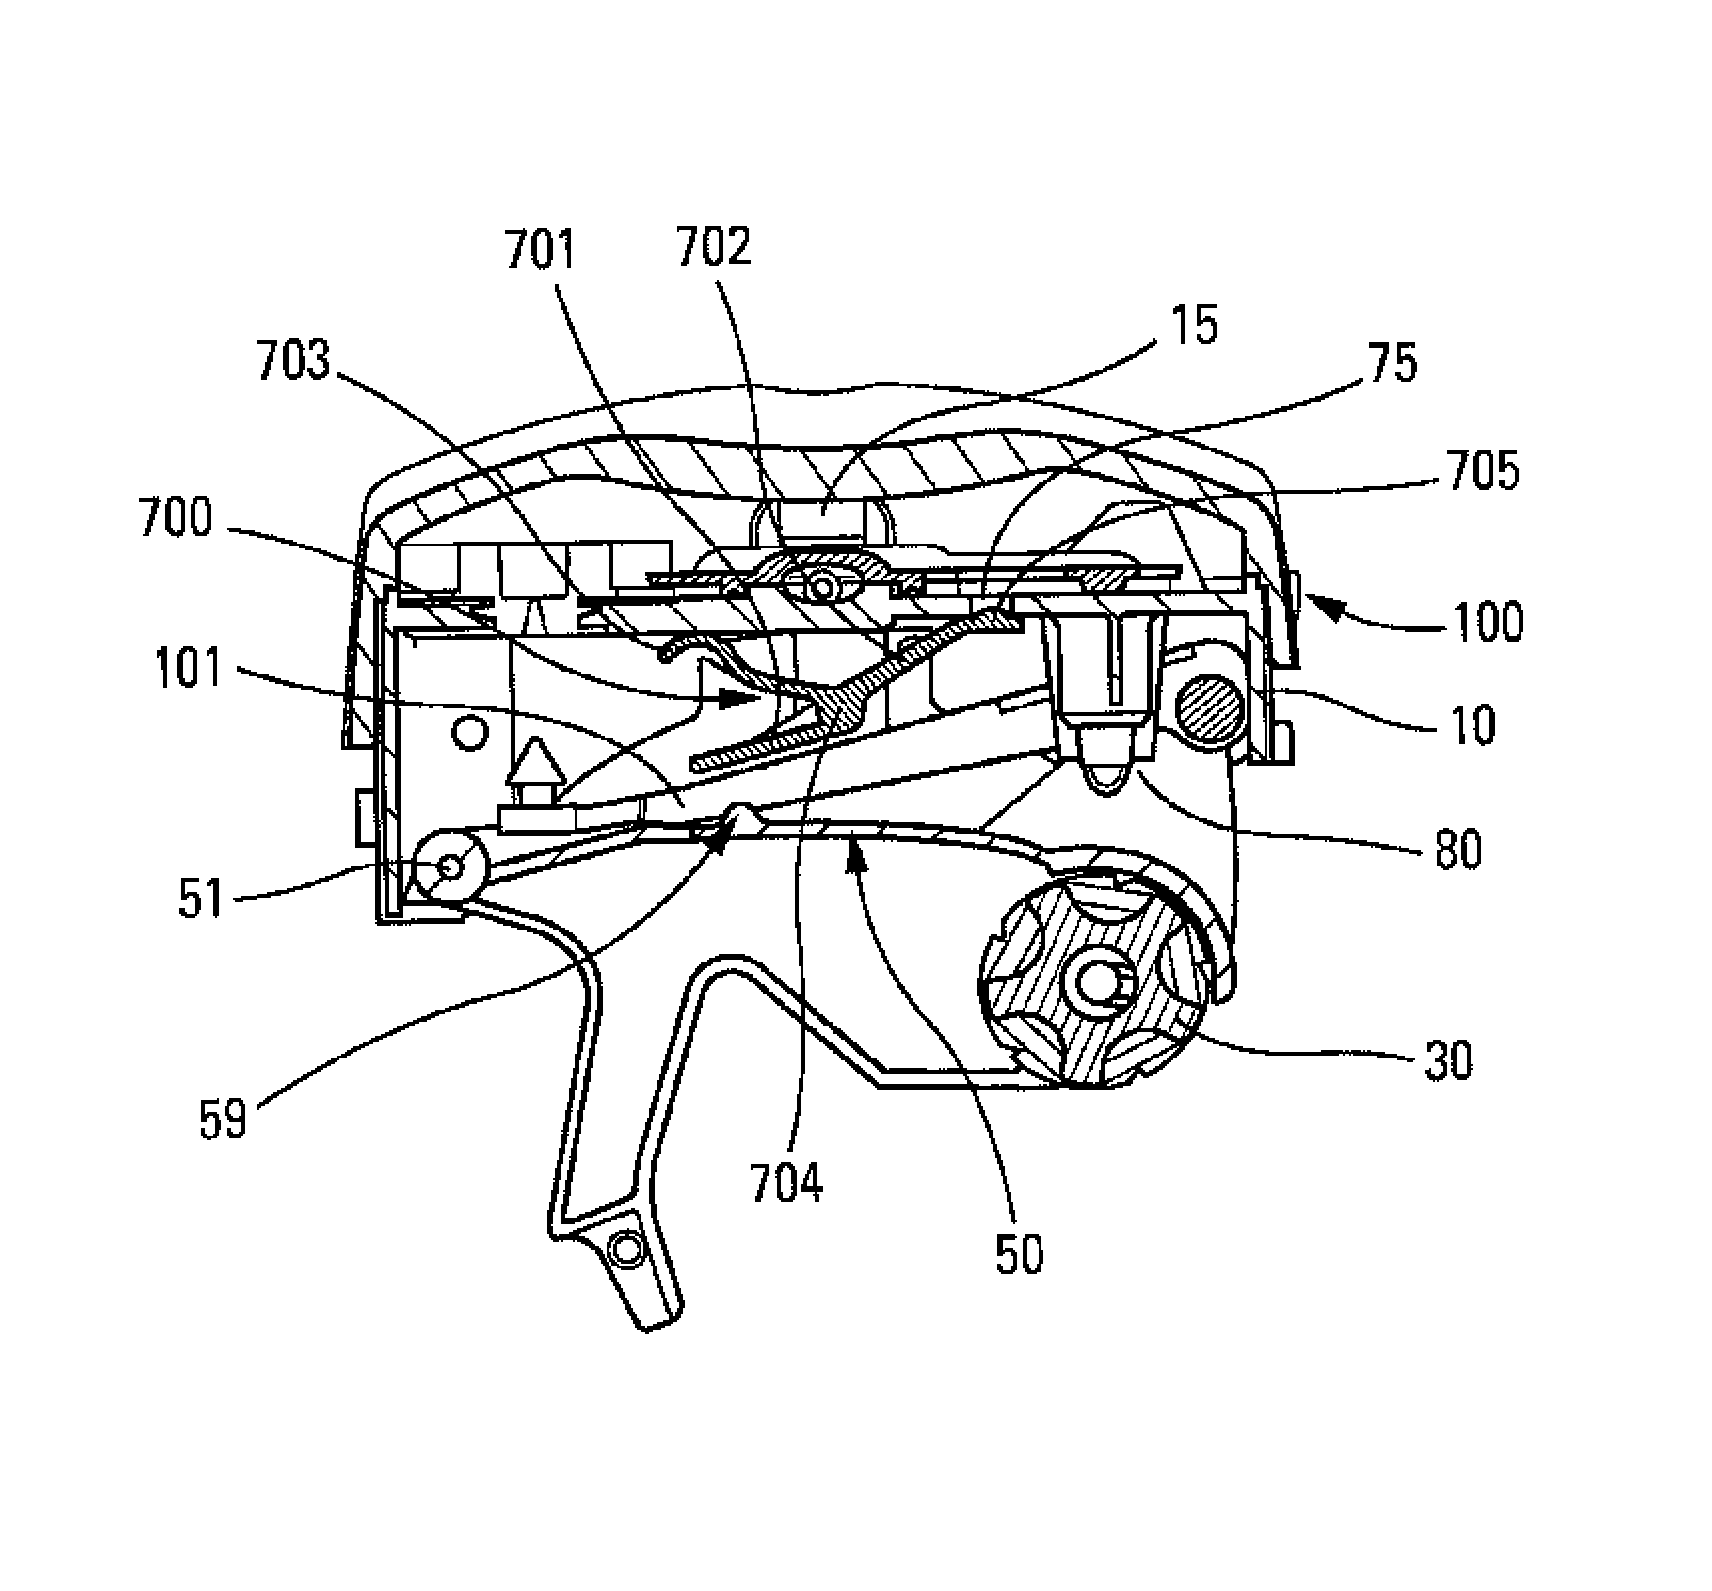 Device for dispensing a fluid product